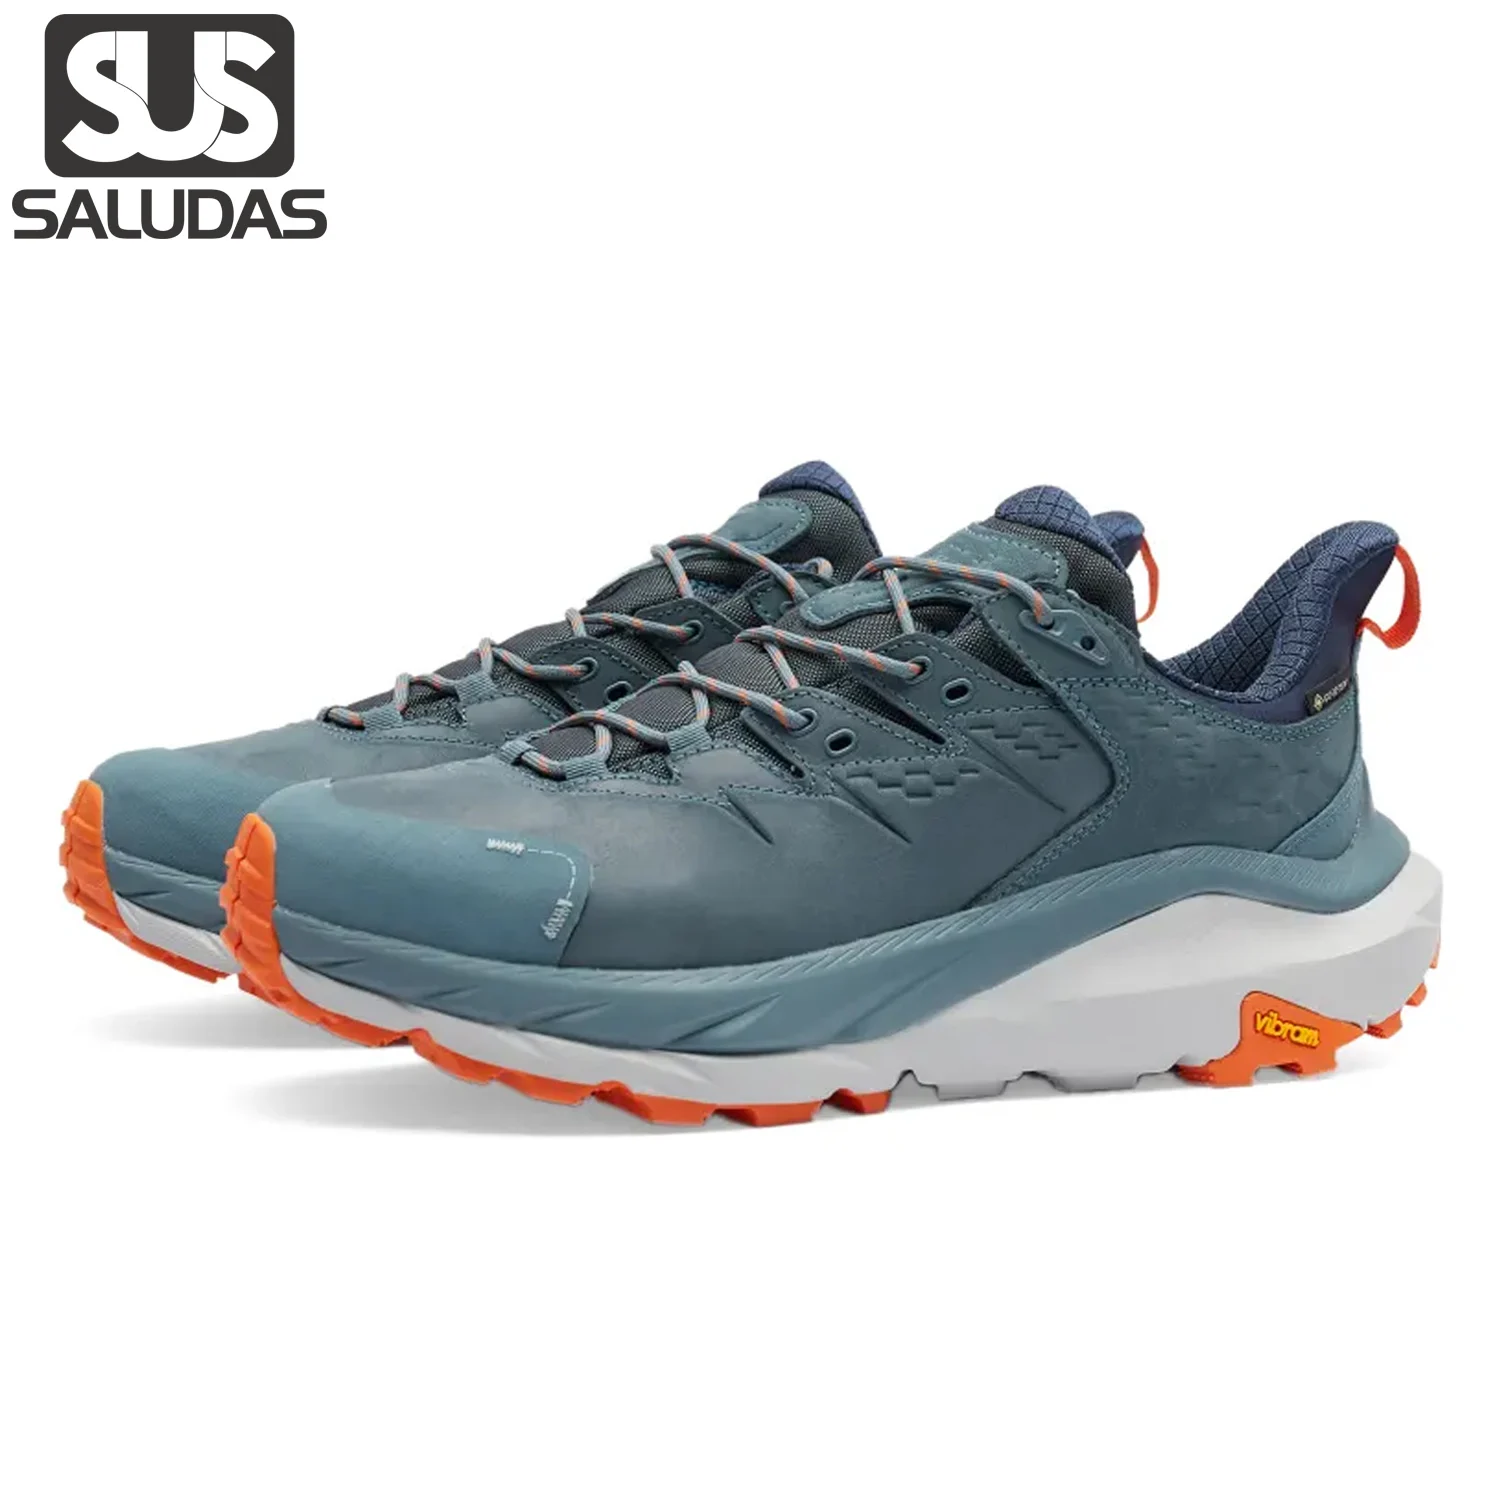 

SALUDAS Kaha 2 Low GTX Hiking Shoes for Men Outdoor Trail Running Shoes Breathable Non-slip Men's Waterproof Trekking Sneakers